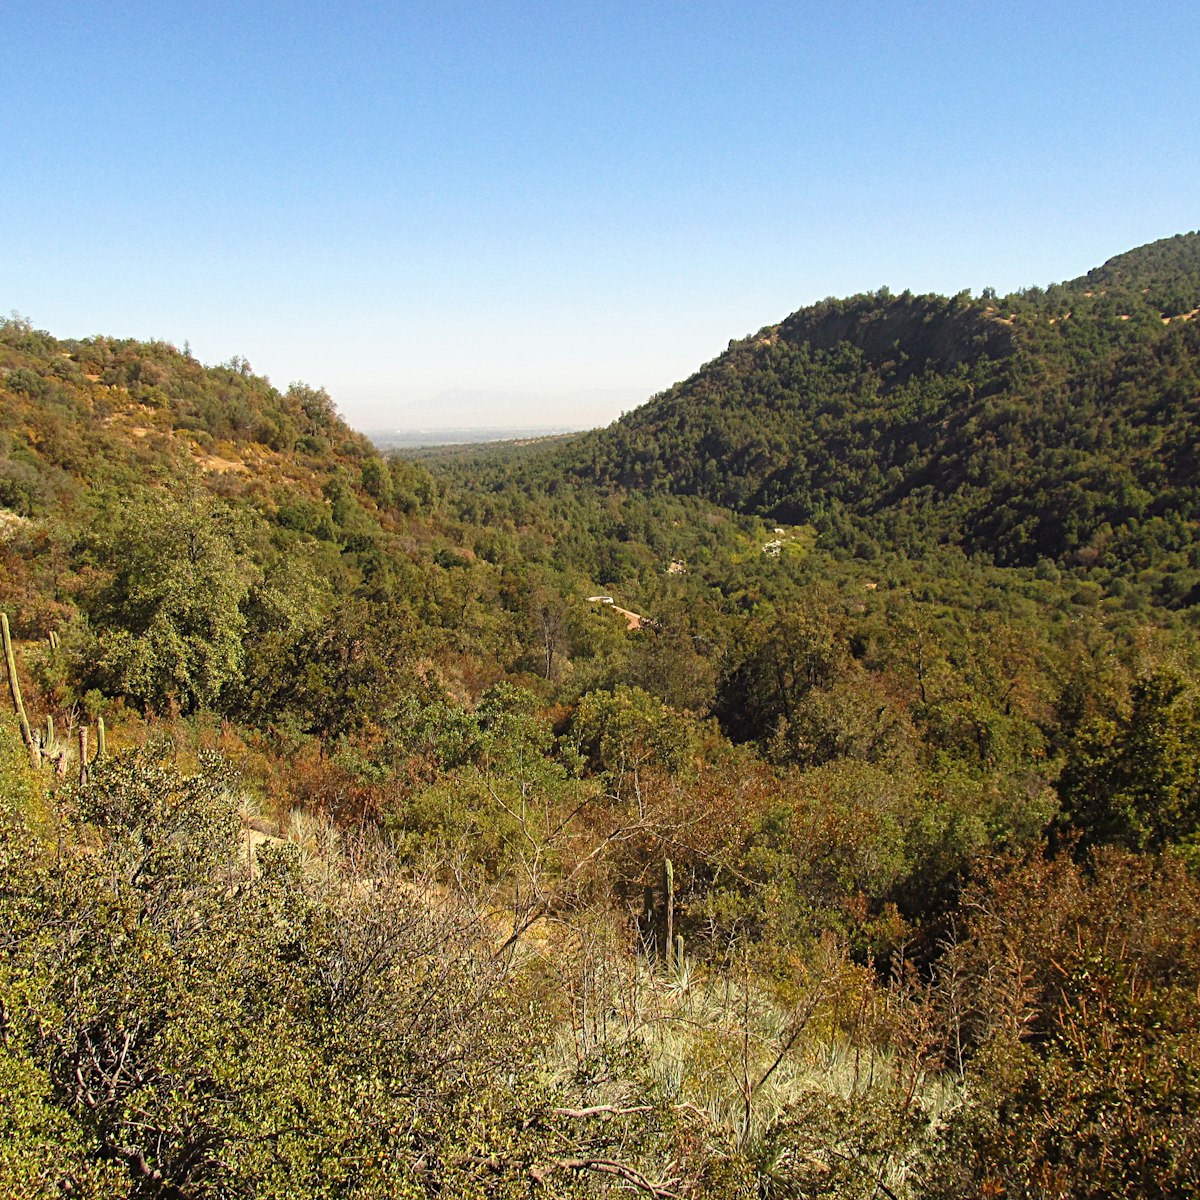 Forest, hills and mountains in summer in Río Clarillo national park in Chile.